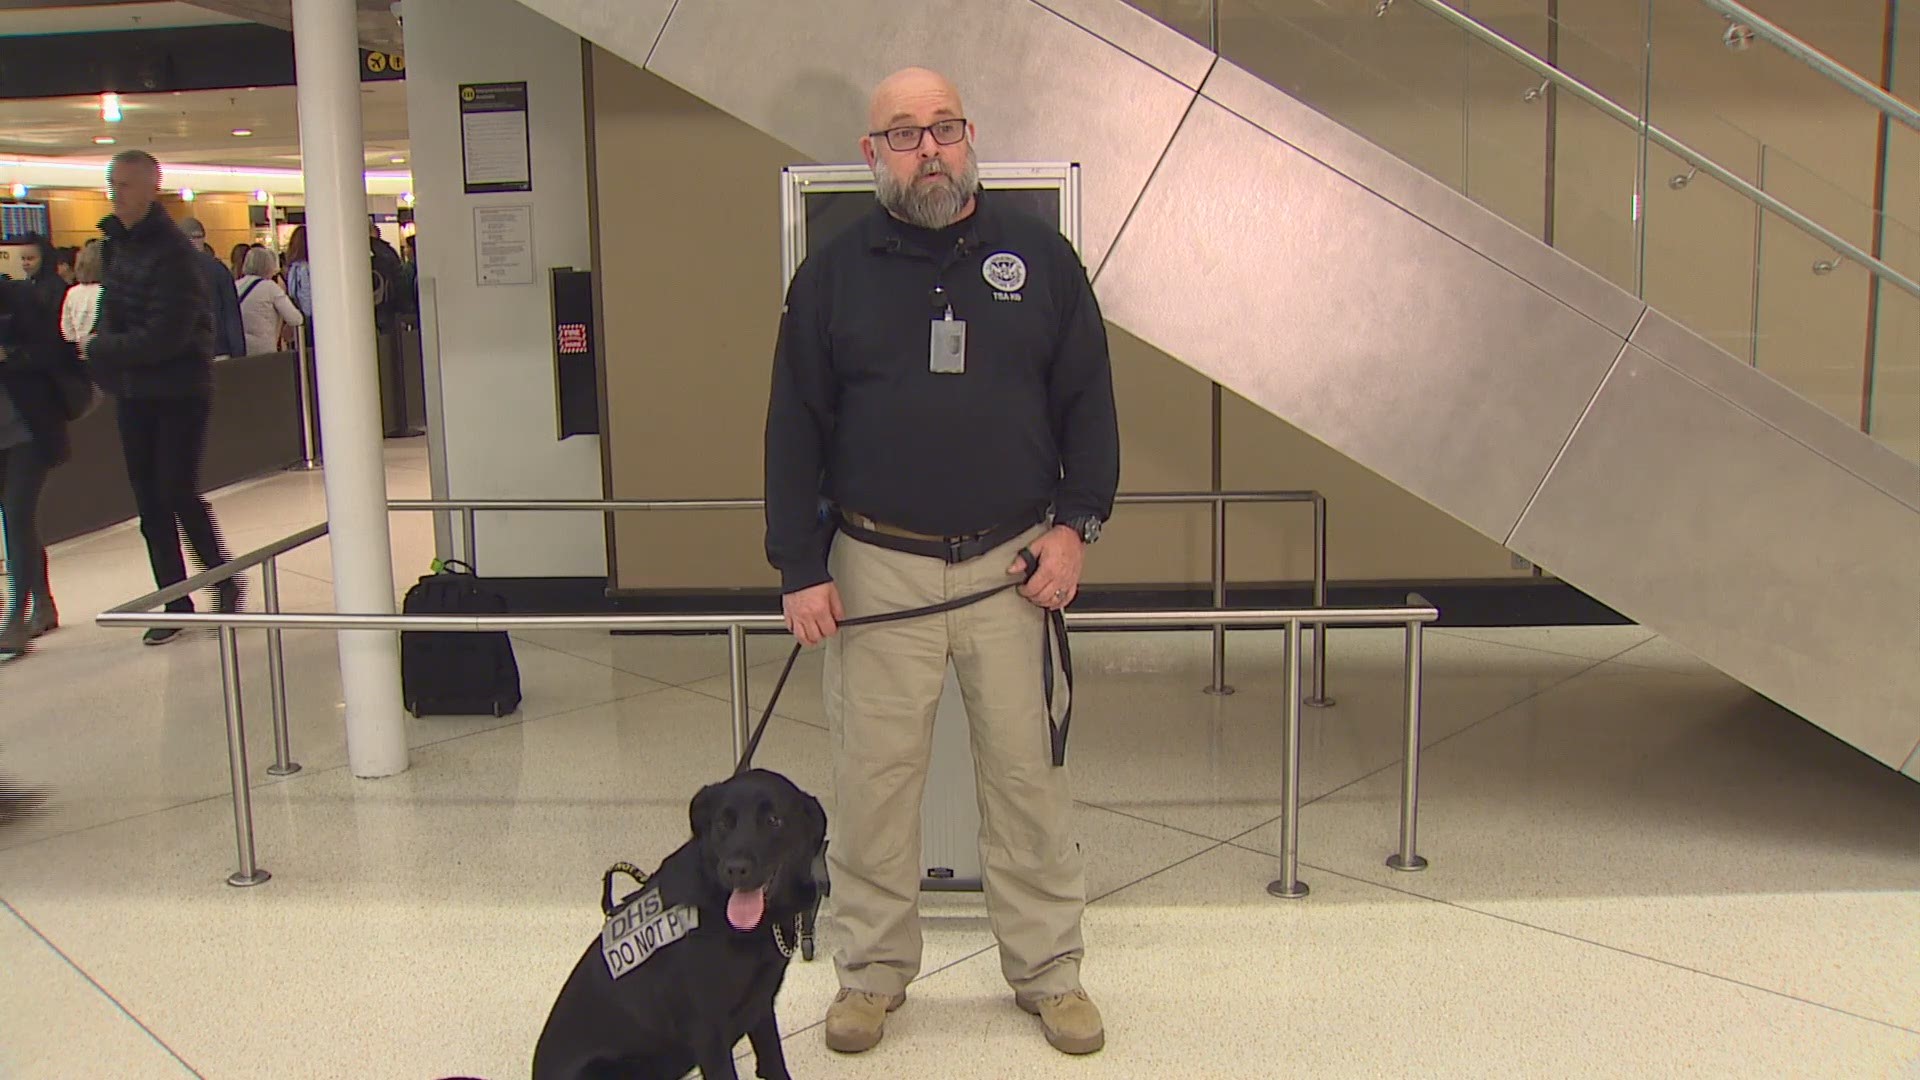 On Wednesday, Bela the explosive detection canine retired from Sea-Tac Airport. Her handler says she can expect to be pampered in retirement.